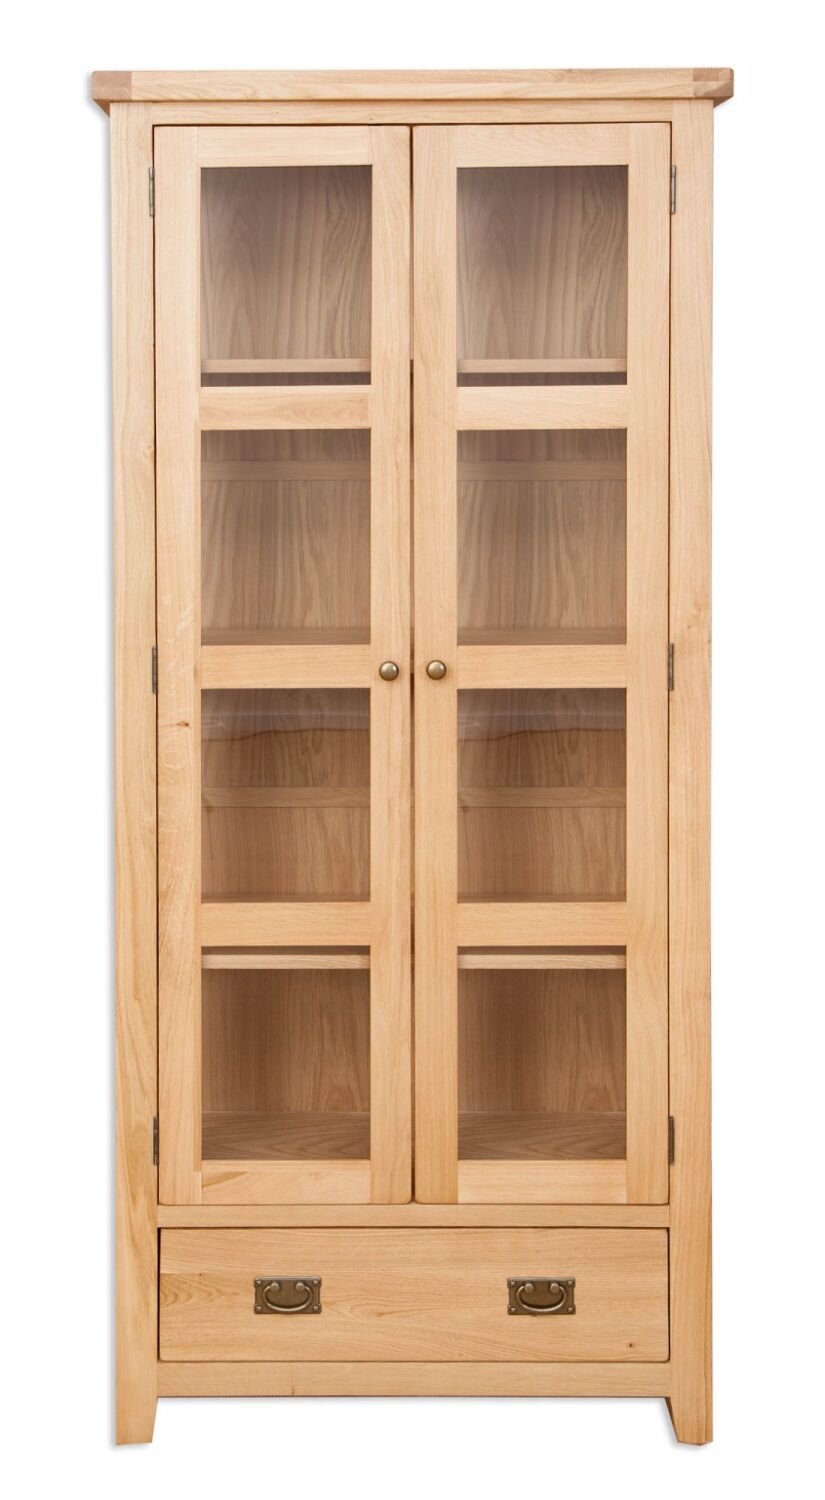 Monmouth Natural Oak Glazed Display Cabinet